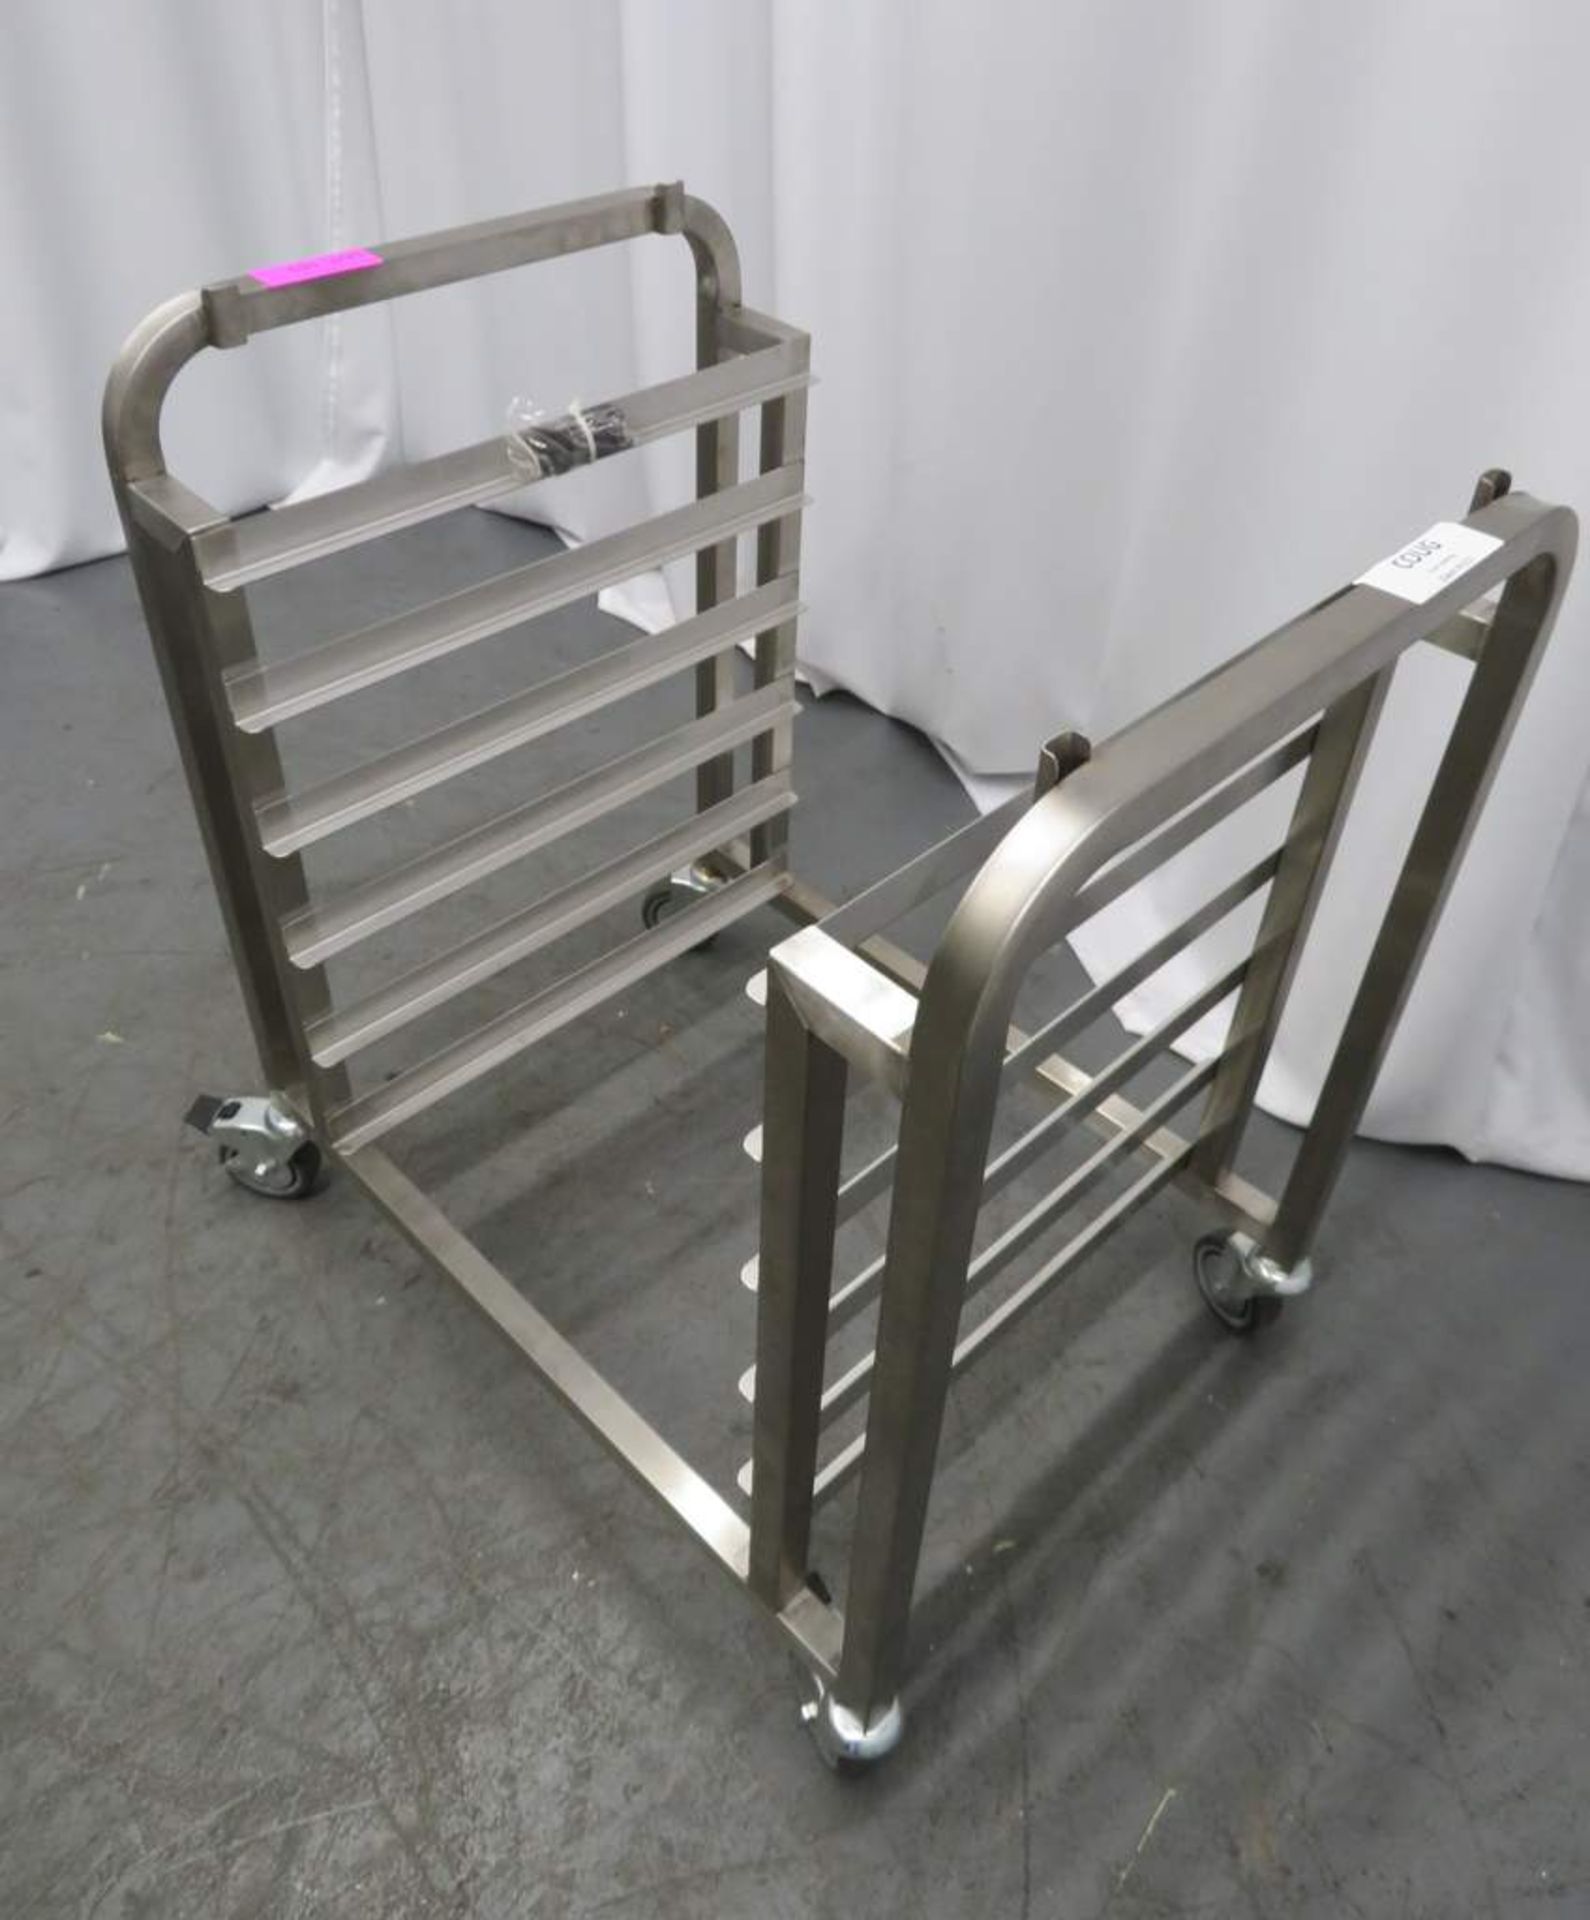 PORTABLE STAINLESS STEEL 6 TRAY OVEN STORAGE RACK - Image 3 of 4